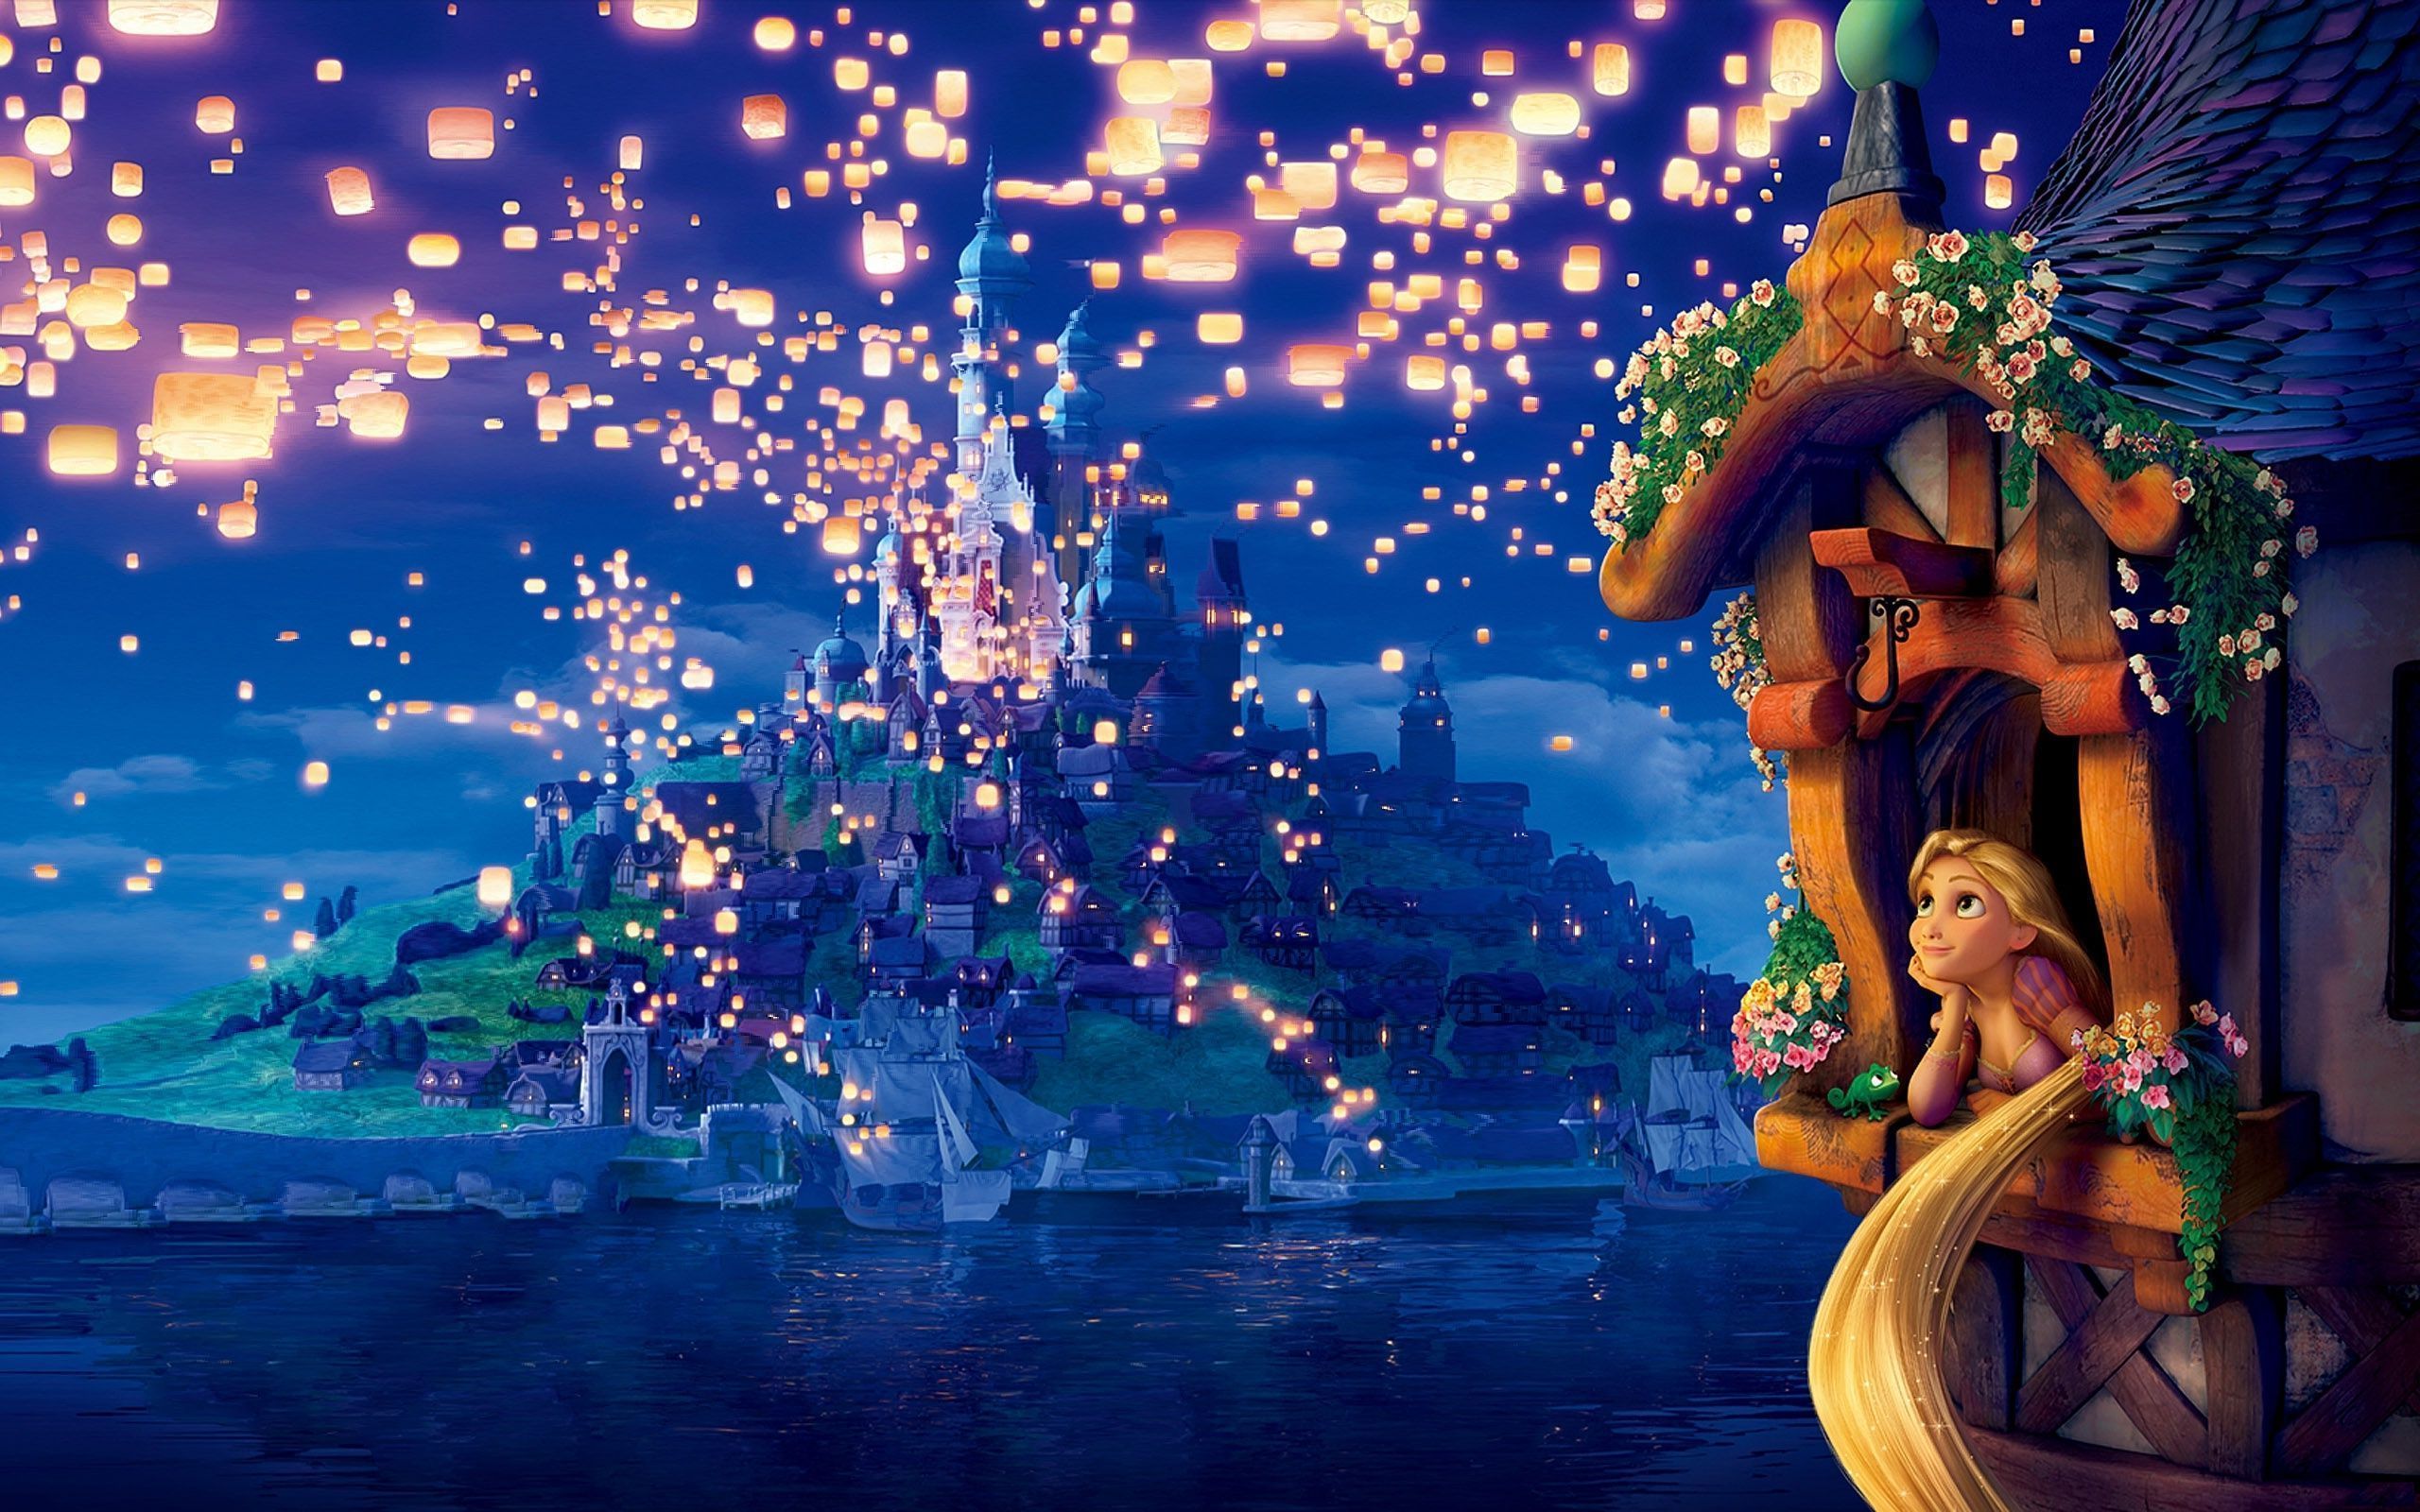 Tangled 2 release date